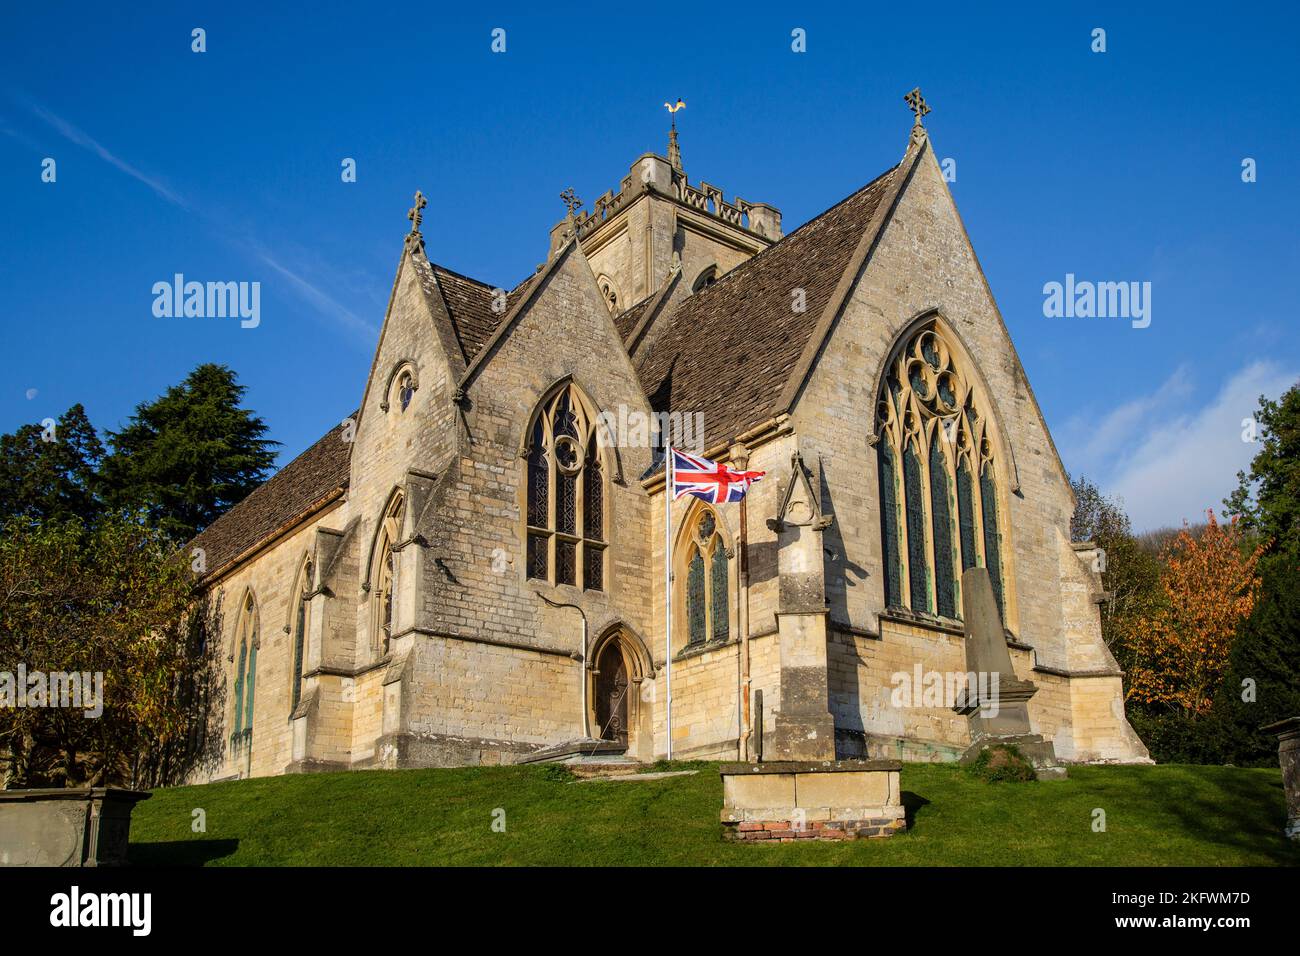 Eglise St Giles, Uley, Gloucestershire Banque D'Images